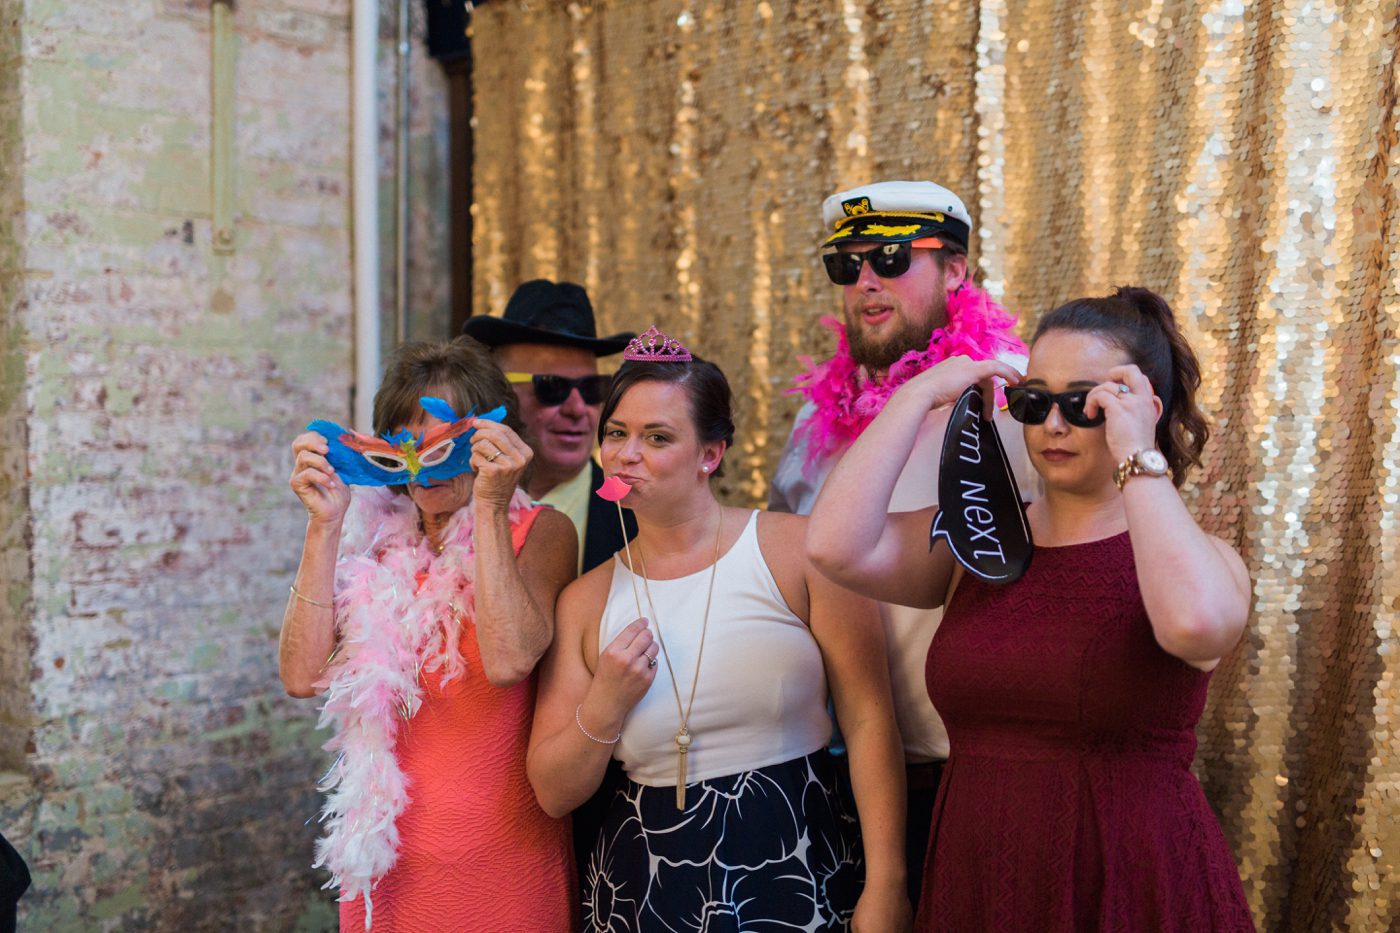 Guests using the photo booth with gold sequin back drop and props 